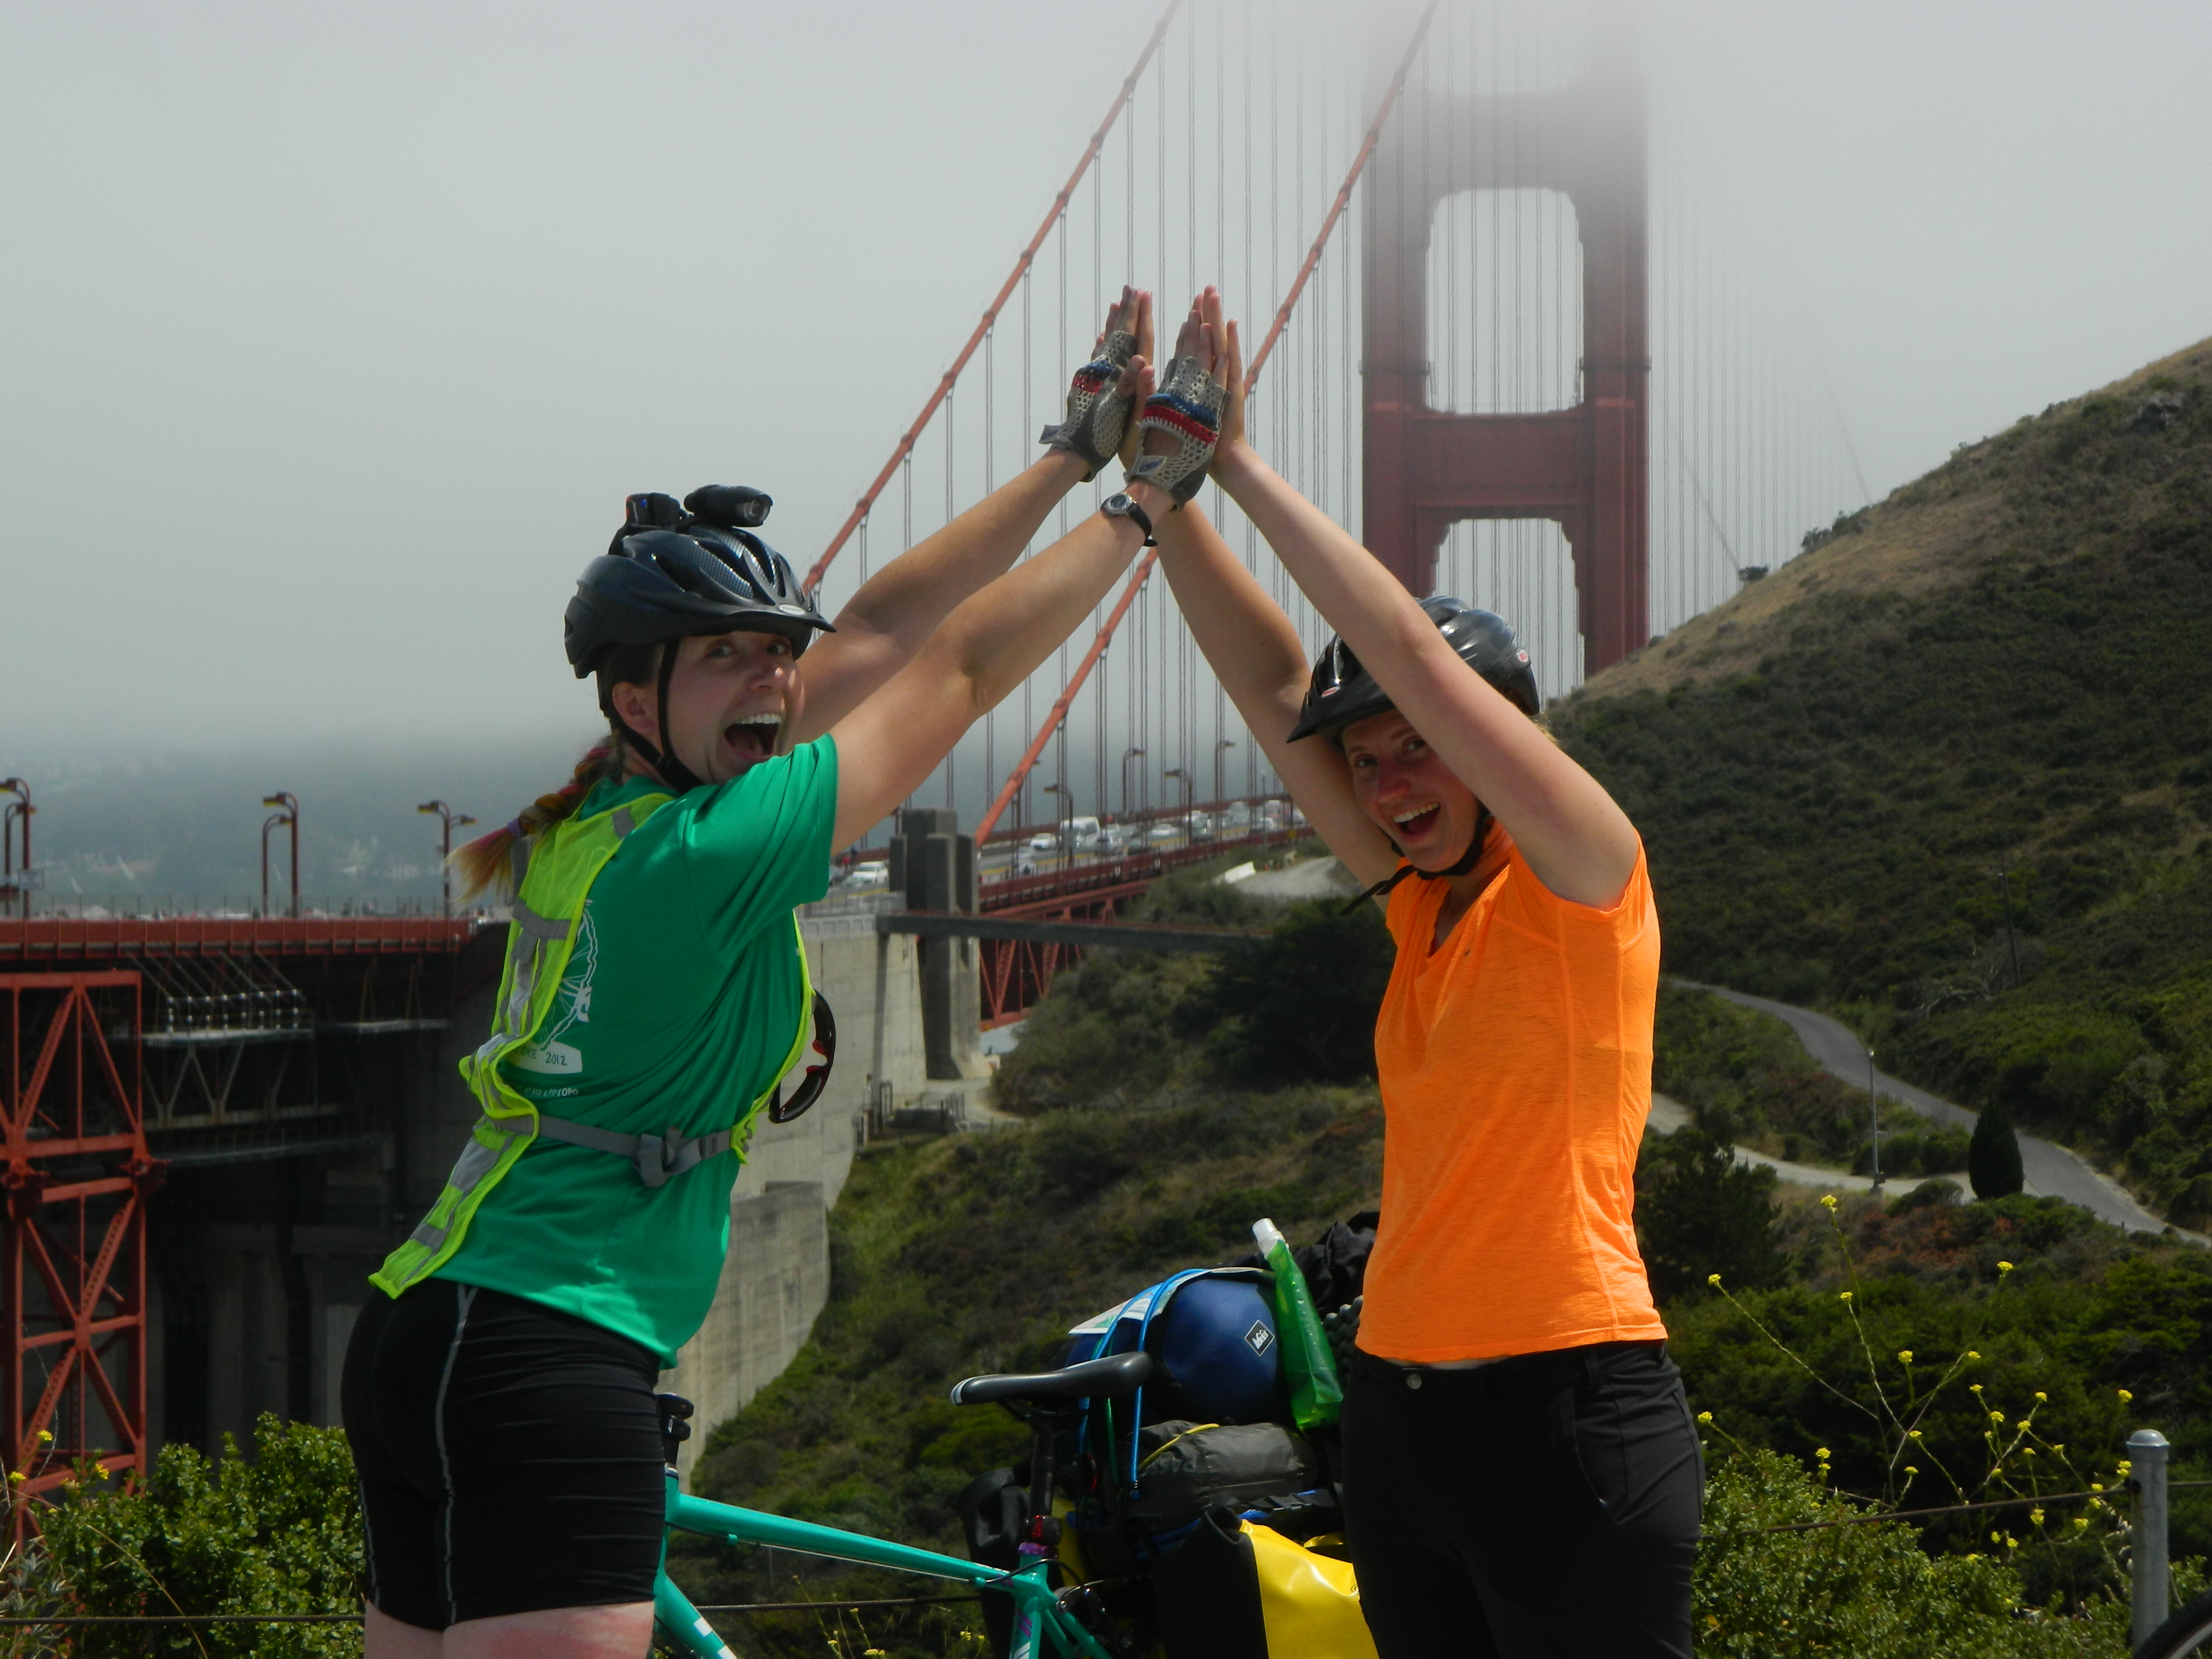 veronica and kayla high five in front of the san francisco bridge